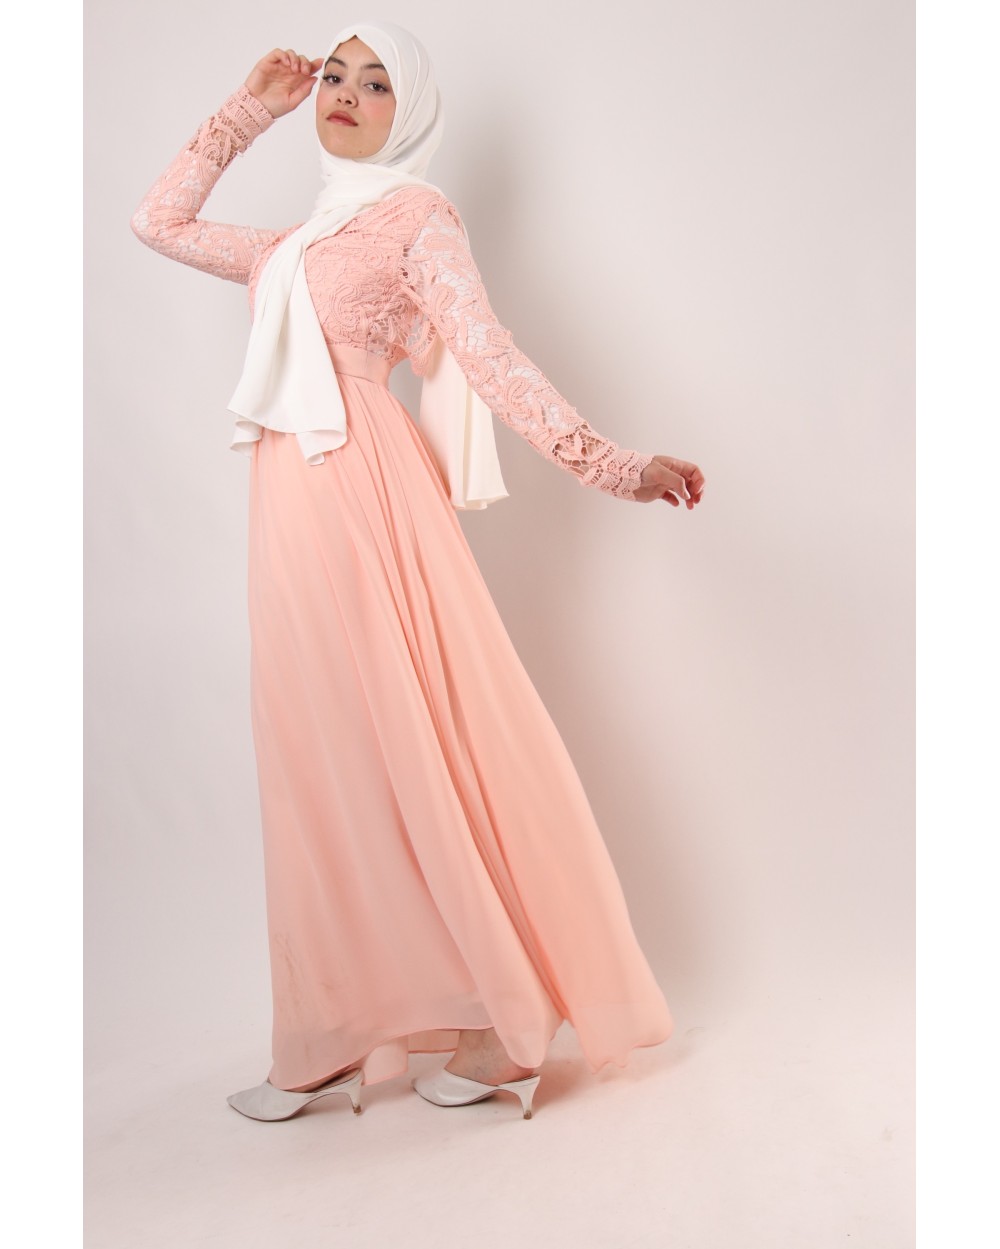 Dentella evening dress with lace sleeves